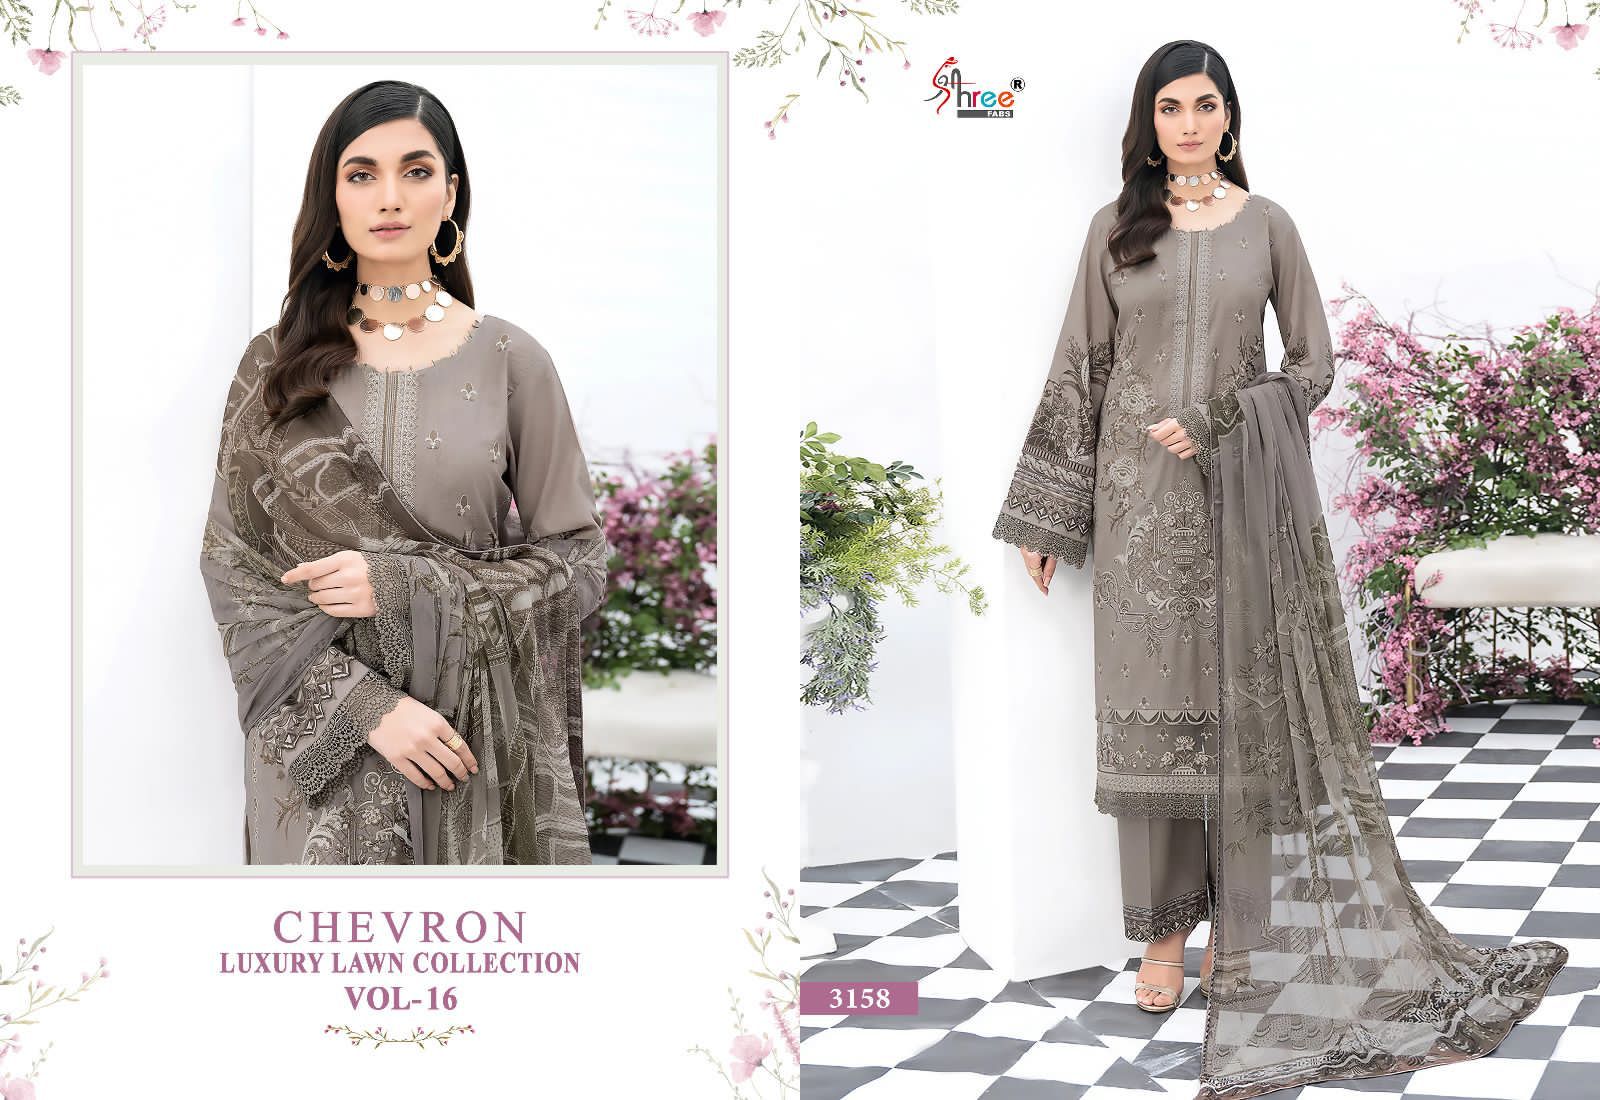 Shree Chevron Luxury Lawn Collection Vol 16 collection 3